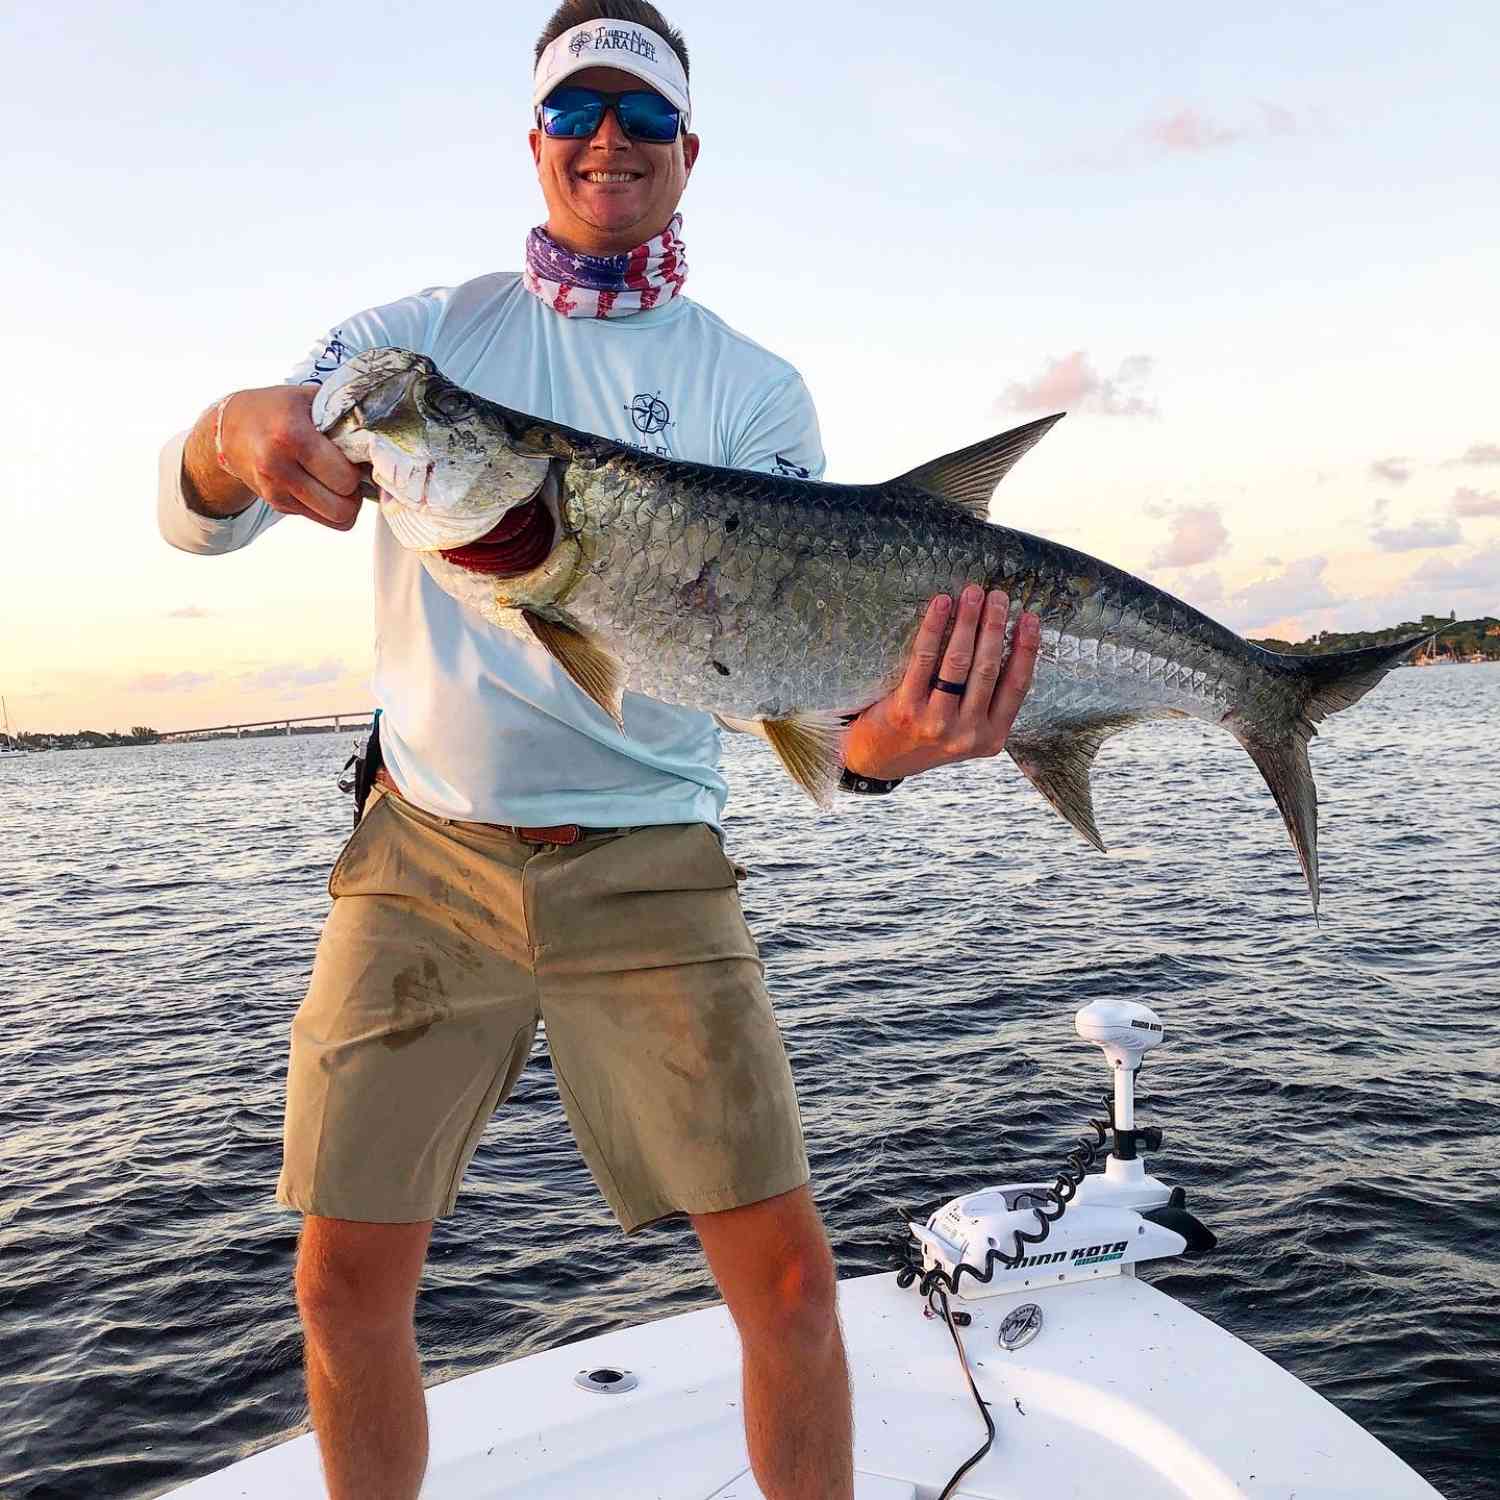 Finally got my first tarpon!! Caught on live finger mullet while pitching up into docks on the St. Lucie River.